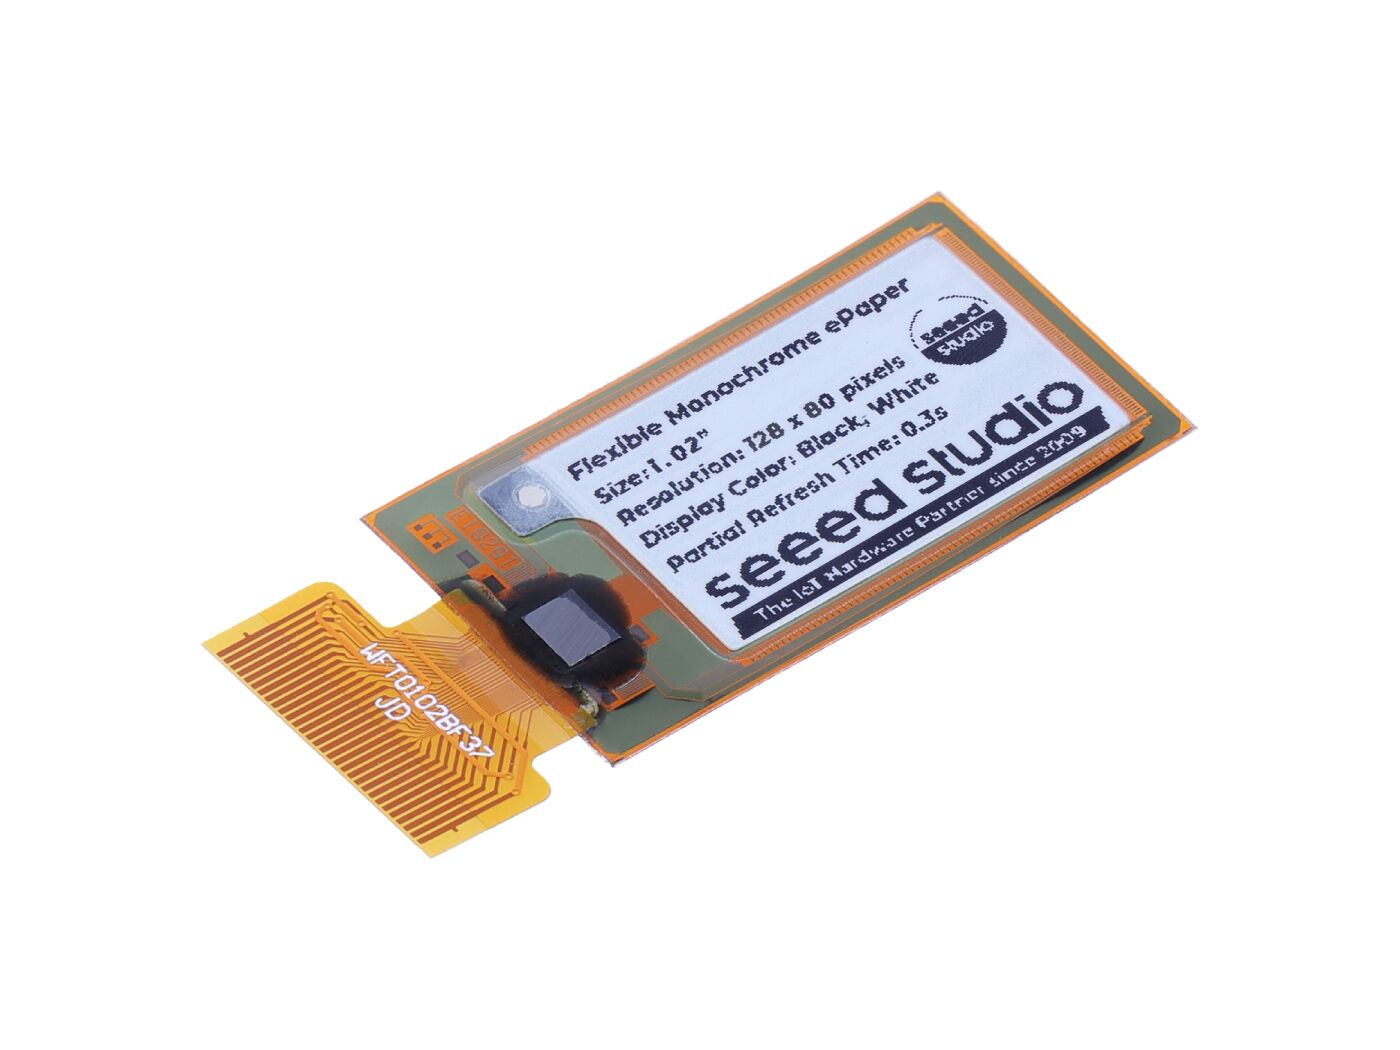 1.02" Flexible Monochrome ePaper Display with 128x80 Pixels, SPI interface, Support XIAO/Arduino/STM32